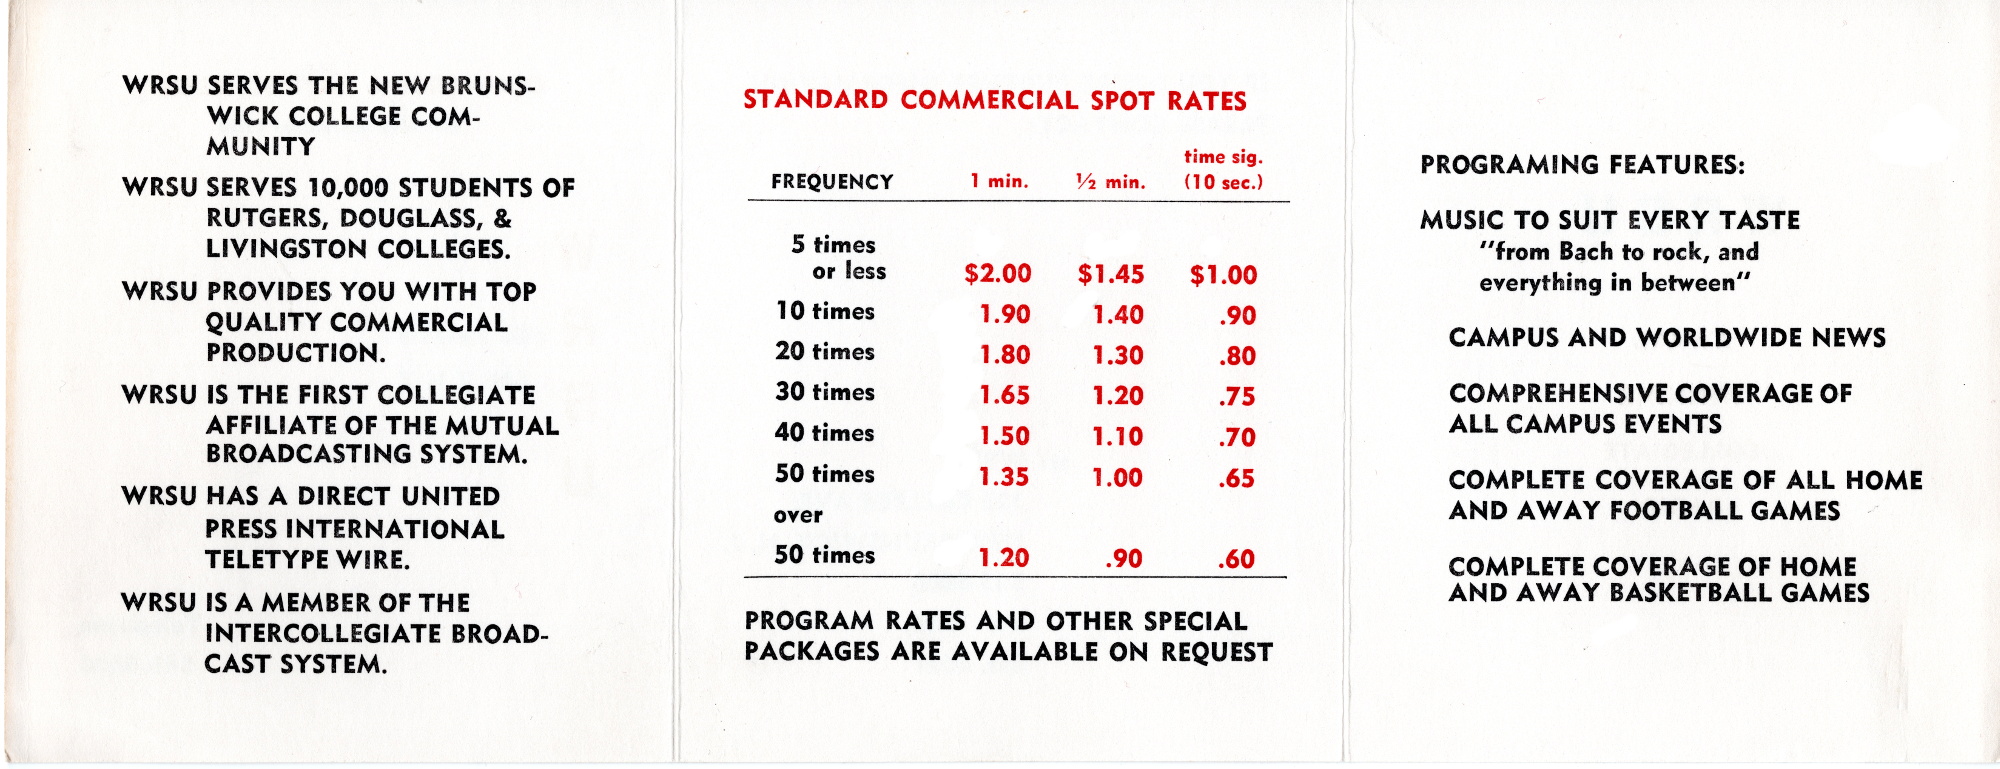 Miniature WRSU 1969 Rate Card - Back - Supplied by Mike Blishak